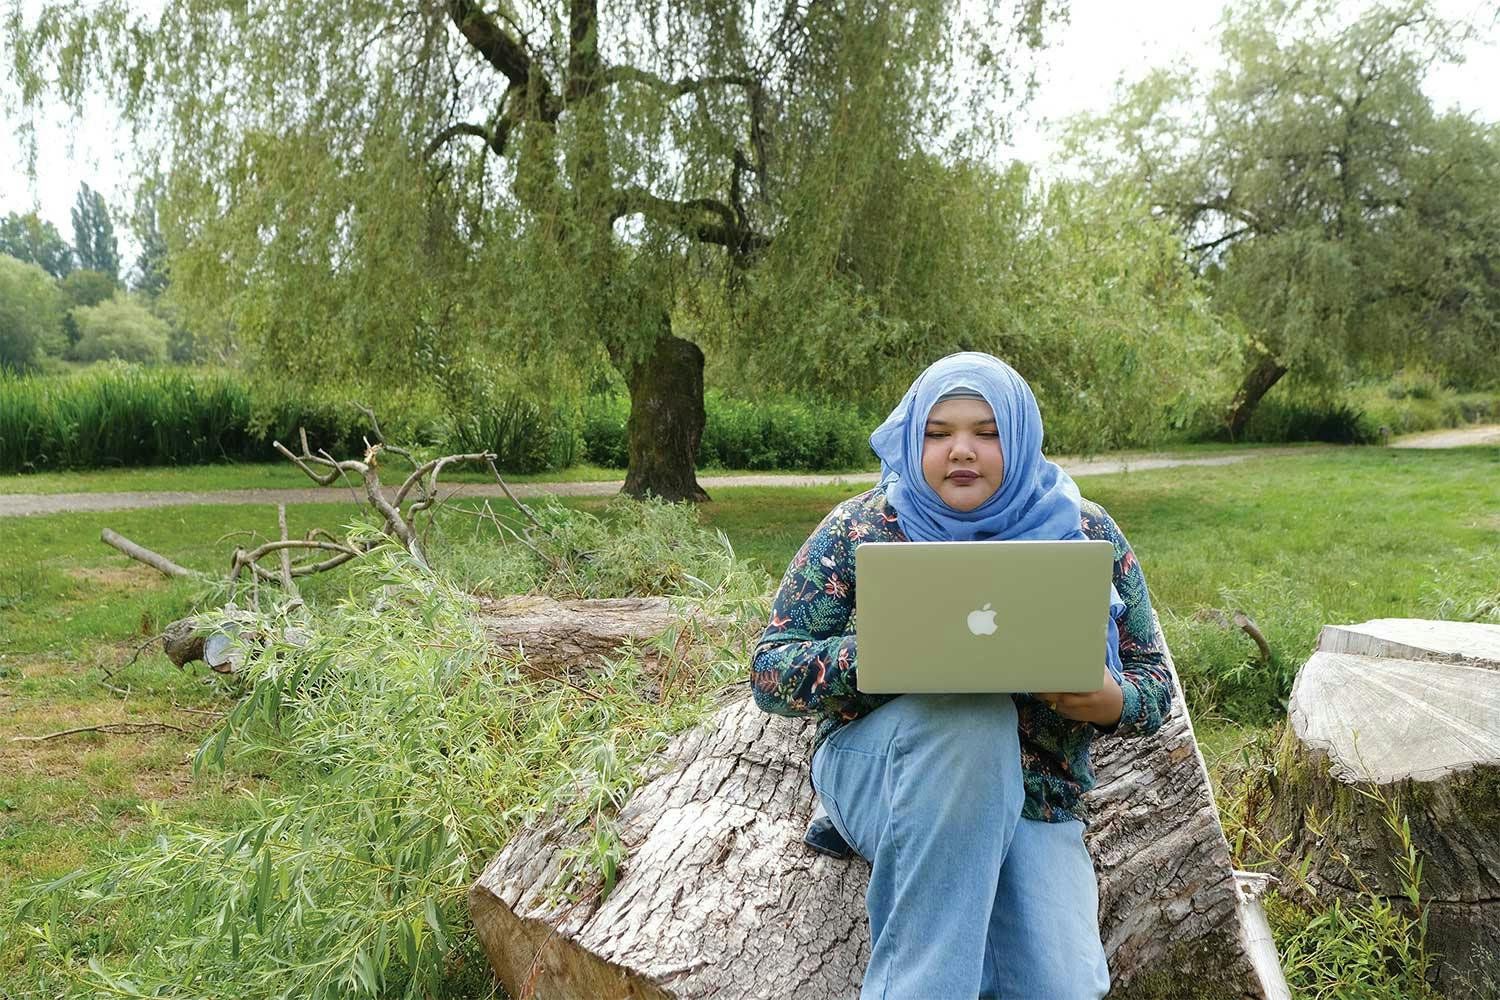 Aliya Abbas sits on a stump at a park. She wears a blue hijab, a floral print shirt and jeans, and works on her laptop.